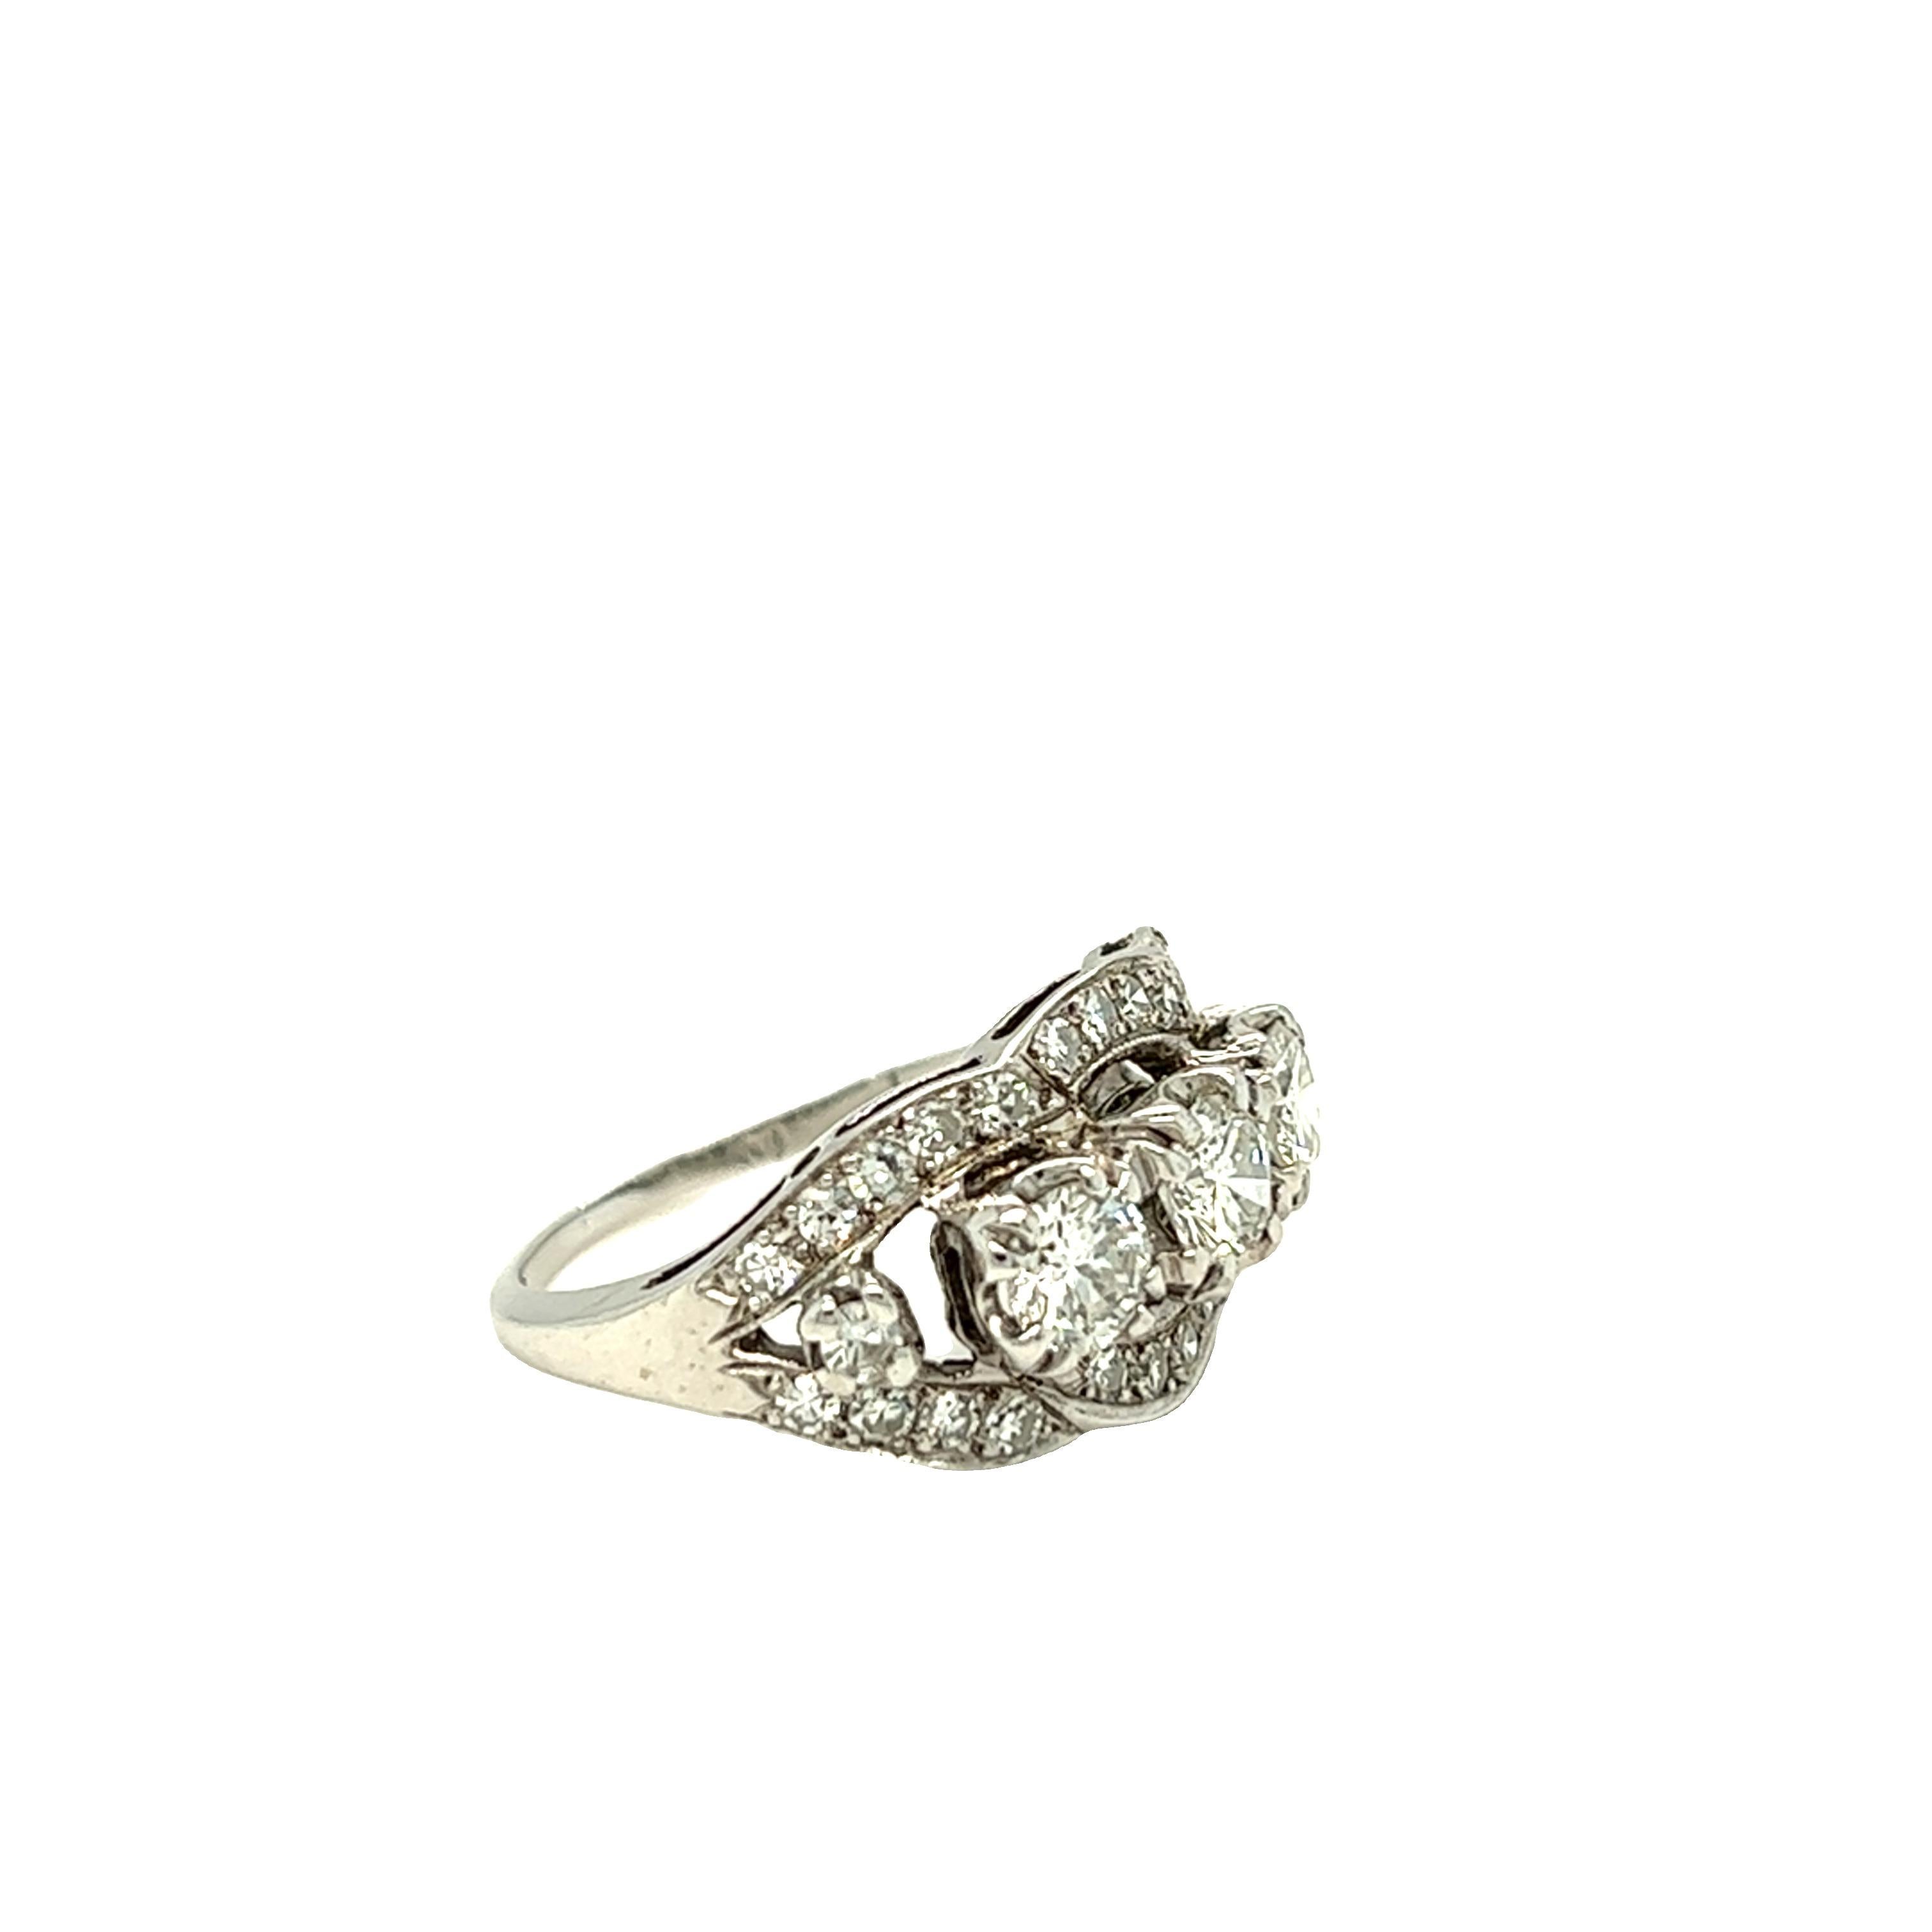 1.78 Cttw Vintage Three Stone Diamond Ring in 14K White Gold In Good Condition For Sale In beverly hills, CA